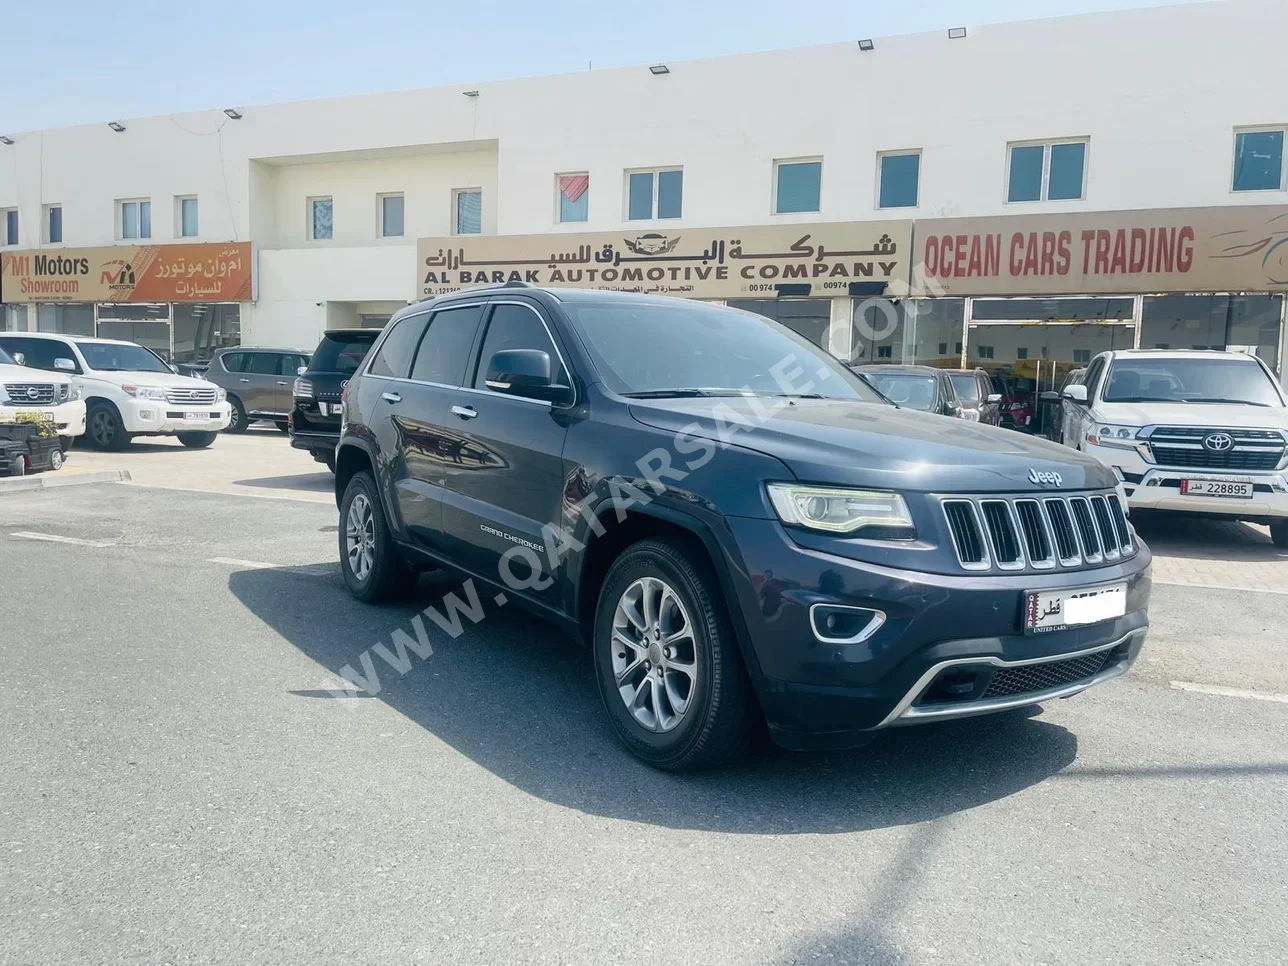  Jeep  Cherokee  Limited  2014  Automatic  178,000 Km  6 Cylinder  Four Wheel Drive (4WD)  SUV  Black  With Warranty